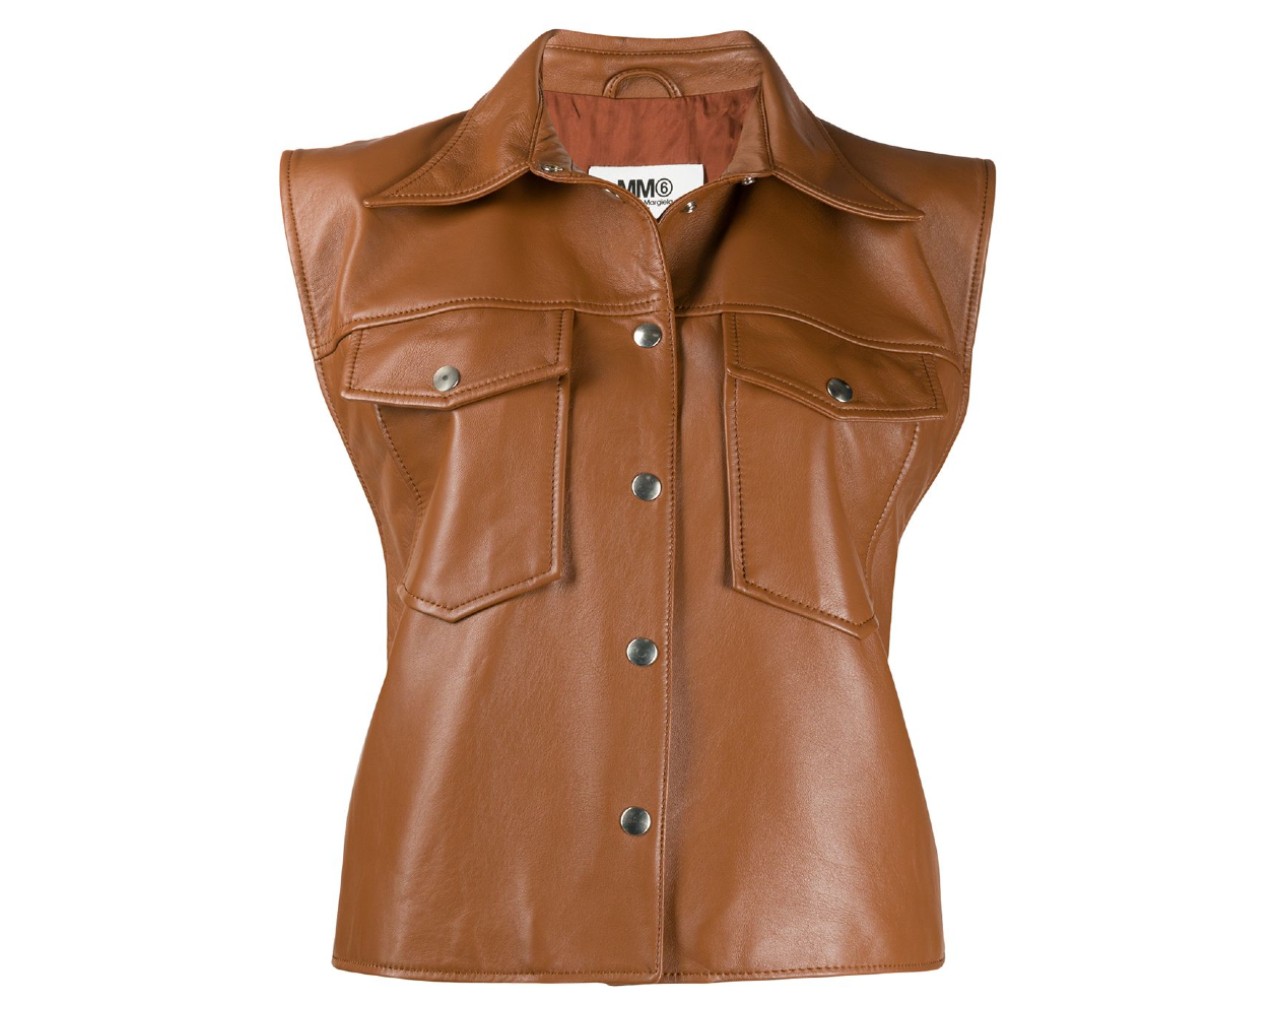 MM6 Maison Margiela sleeveless leather jacket, inspired by Bella Hadid's brown leather vest